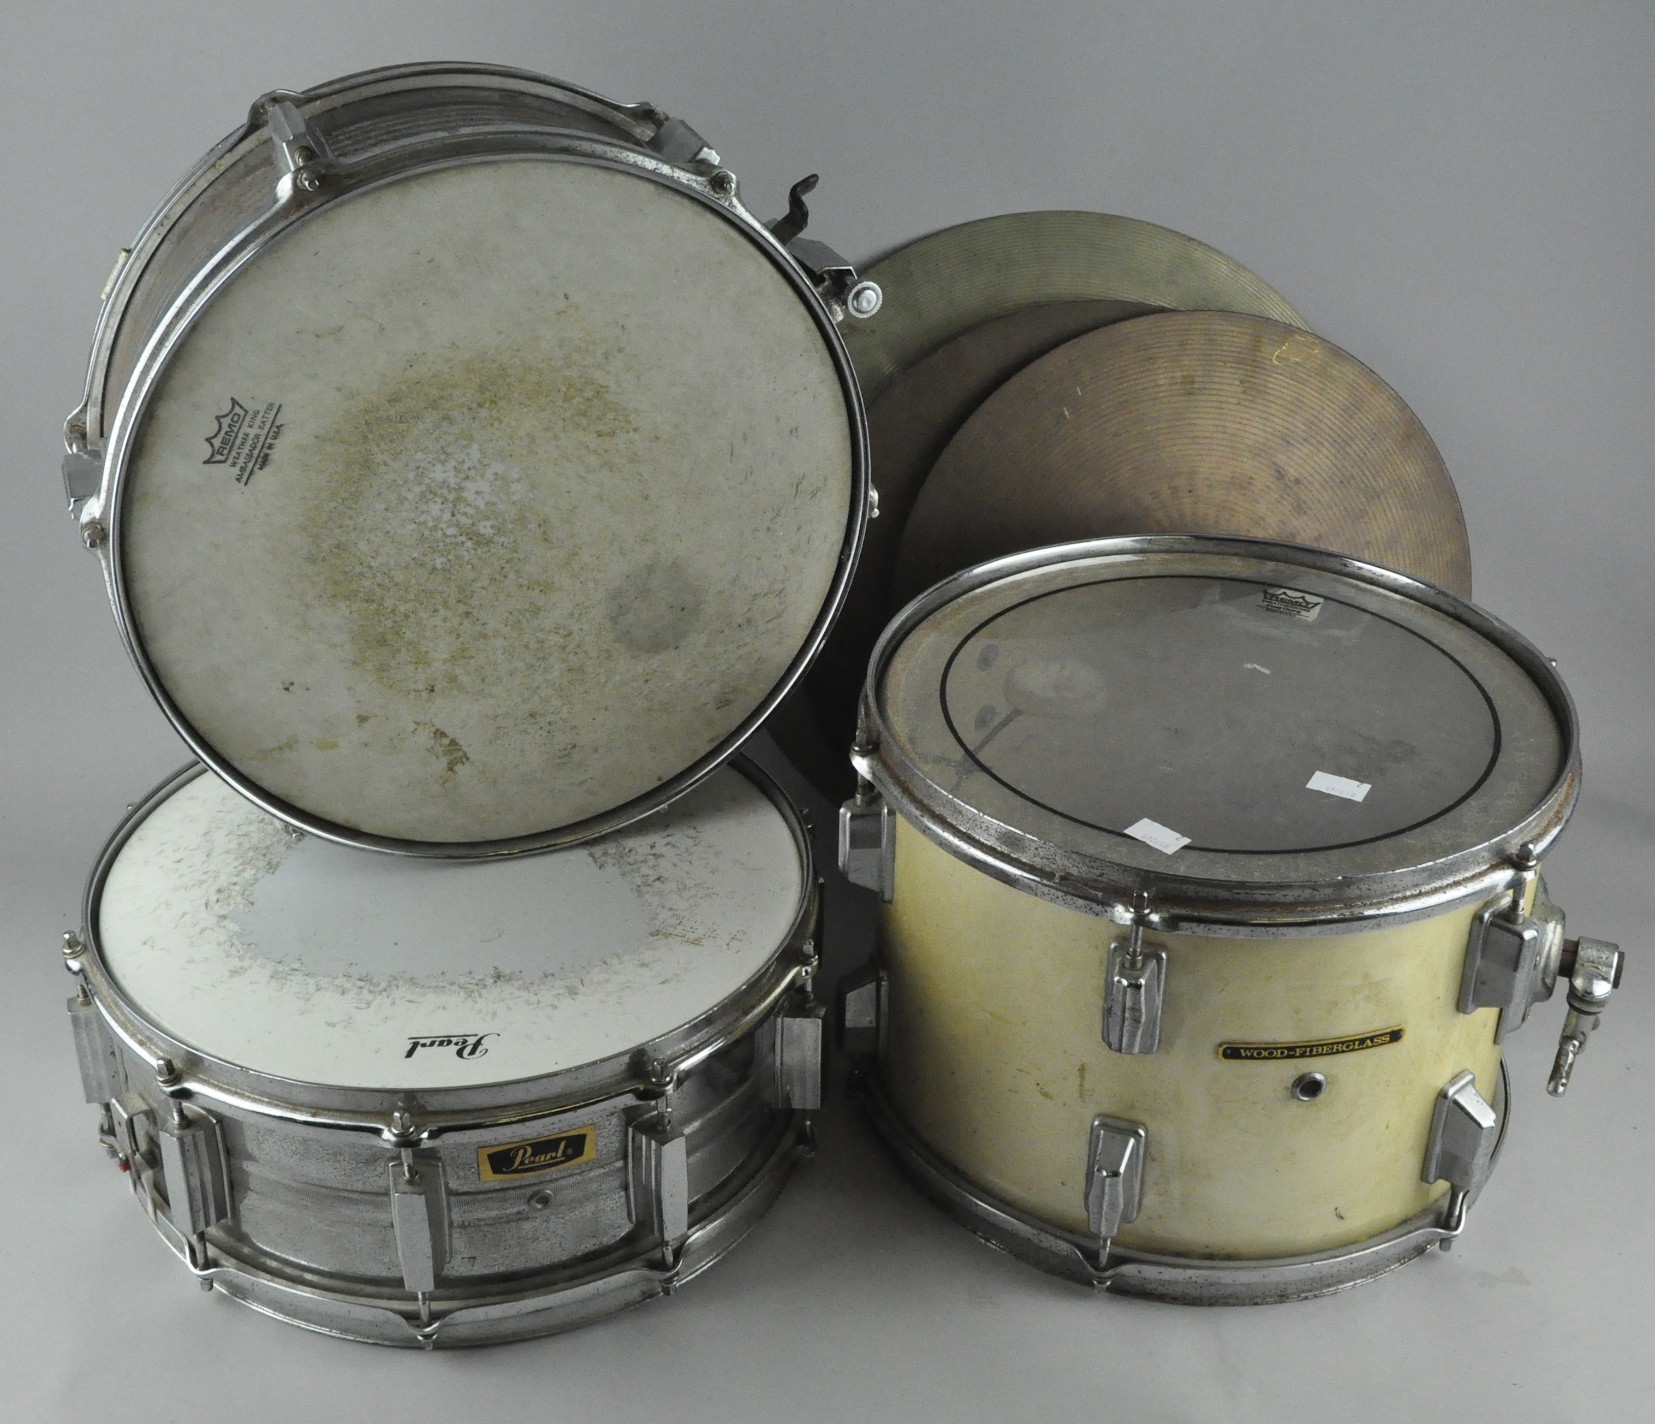 Mixed musical items, Two Pearl drums, a snare drum, three cymbals and a Lindaco Voice projector